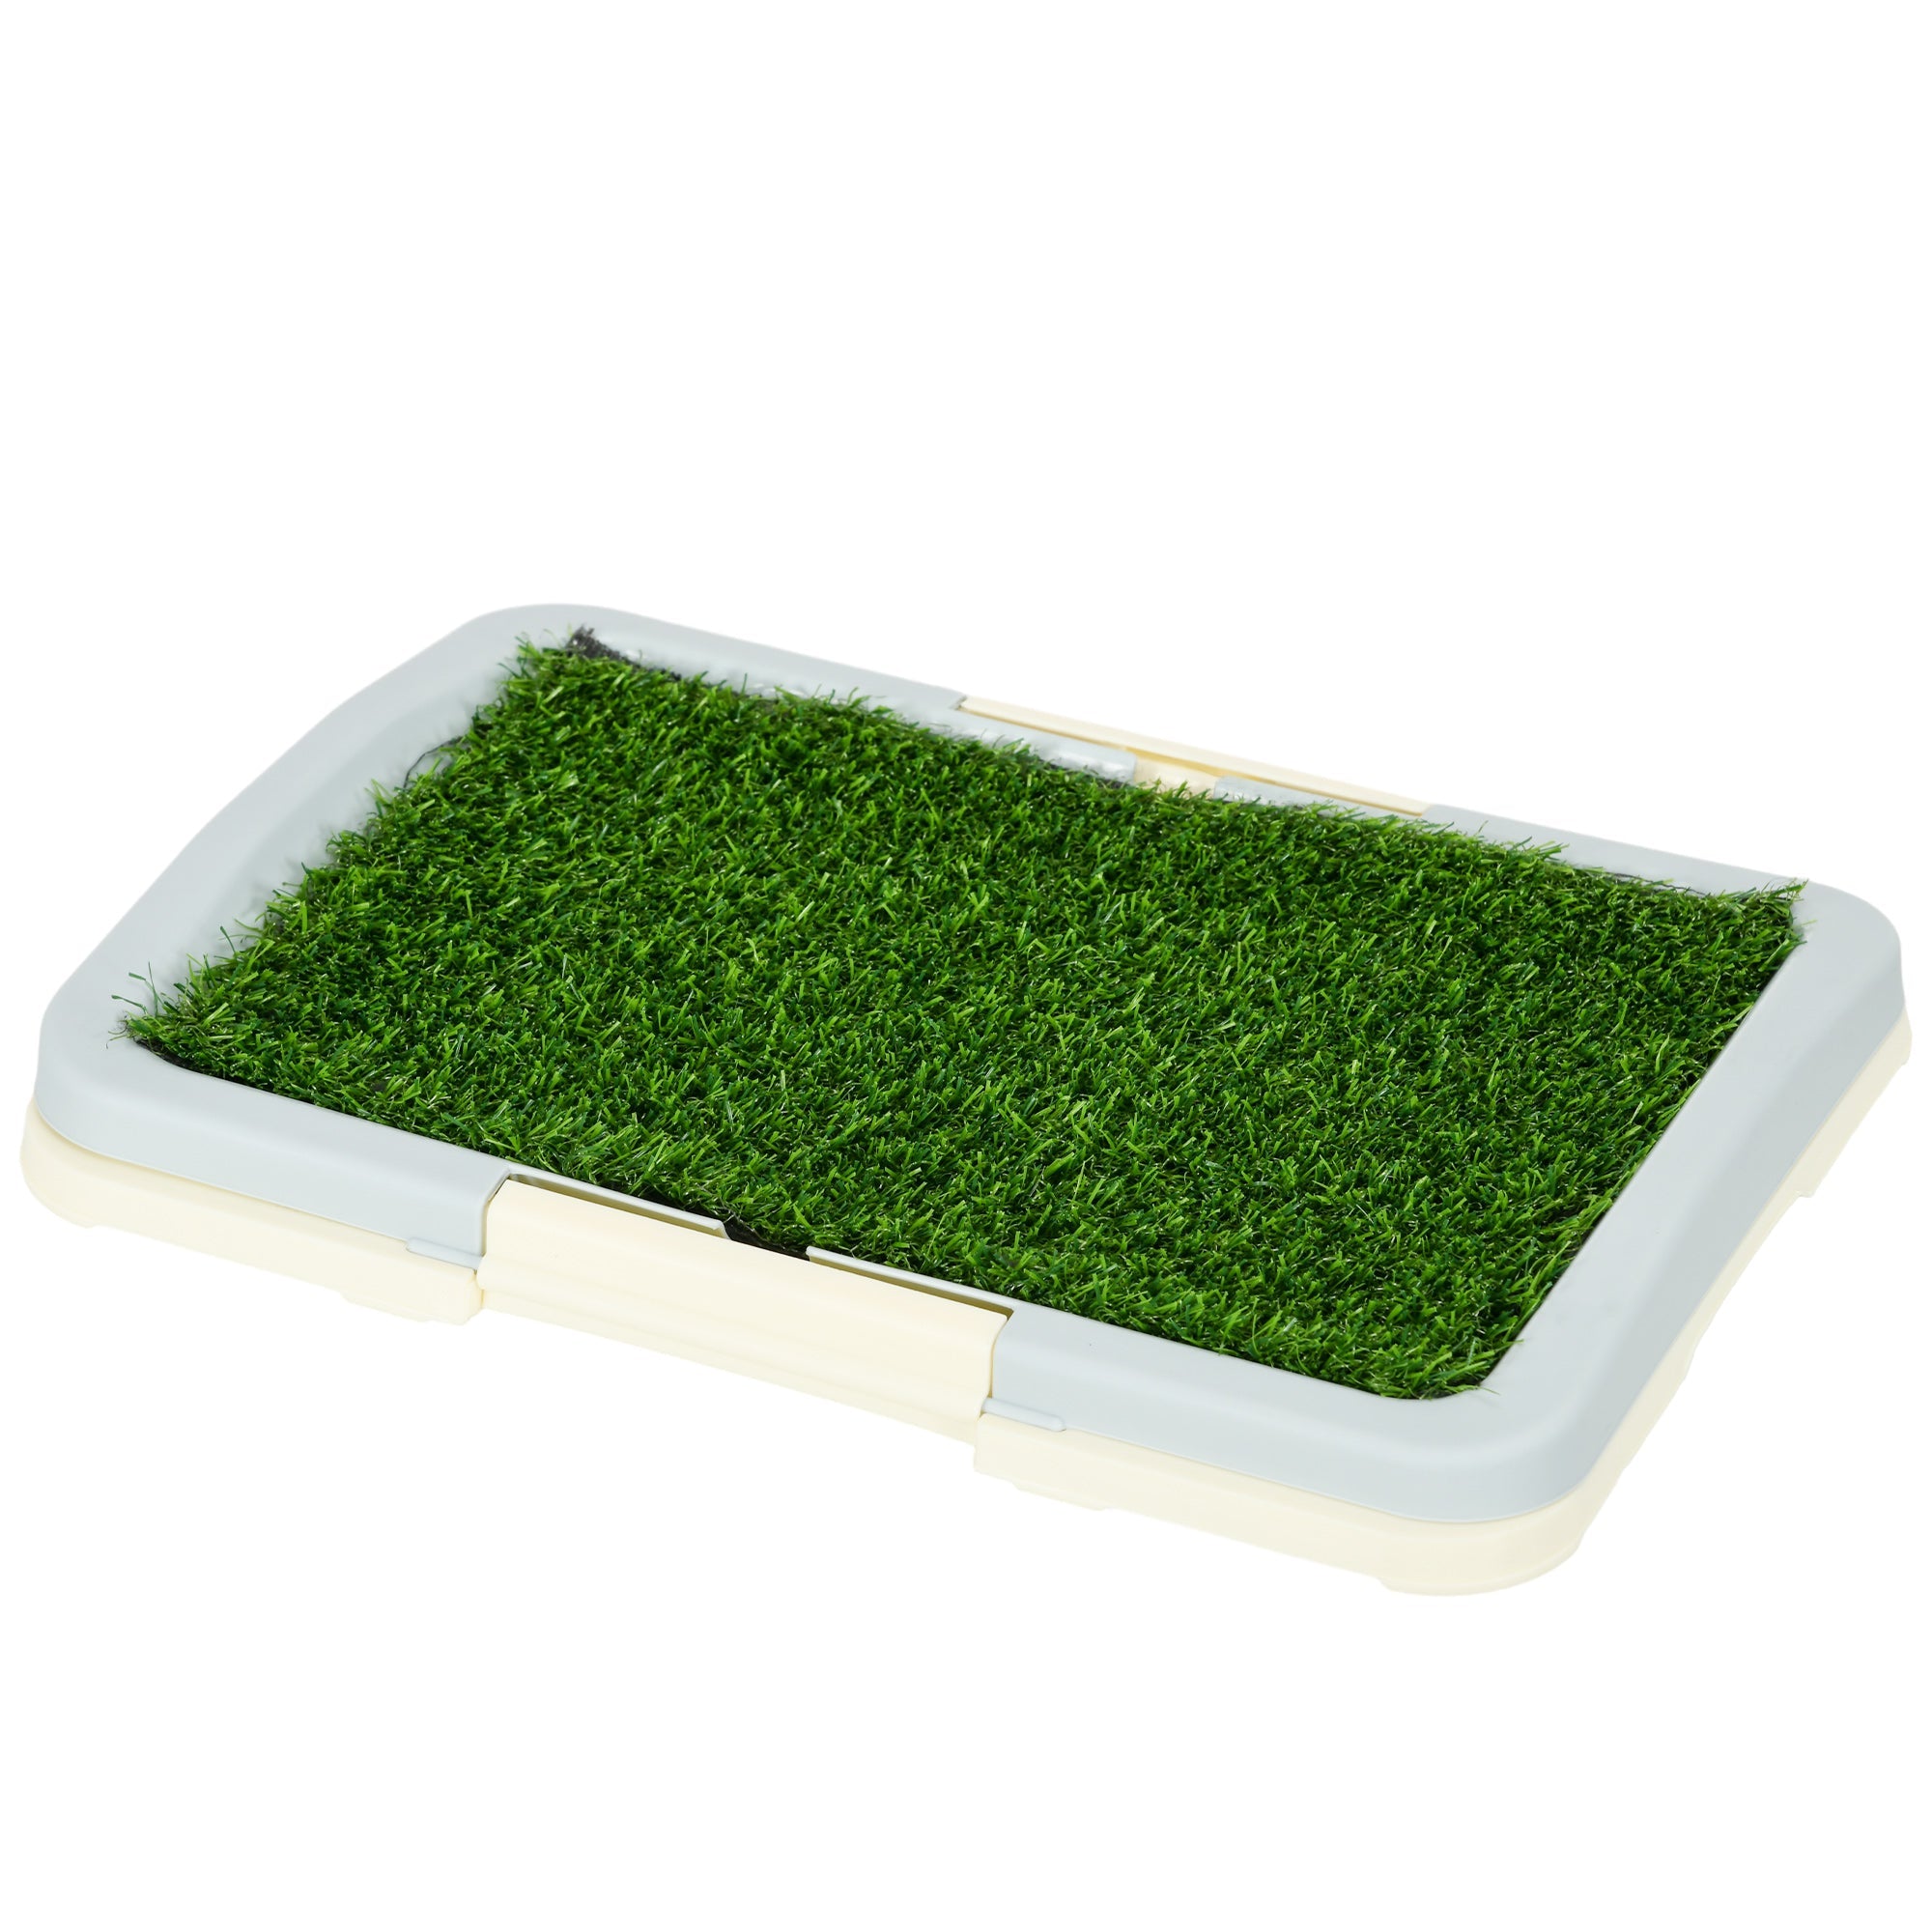 Puppy Training Pad Indoor Portable Puppy Pee Pad with Artificial Grass, Grid Panel, Tray, 46.5 x 34cm-0